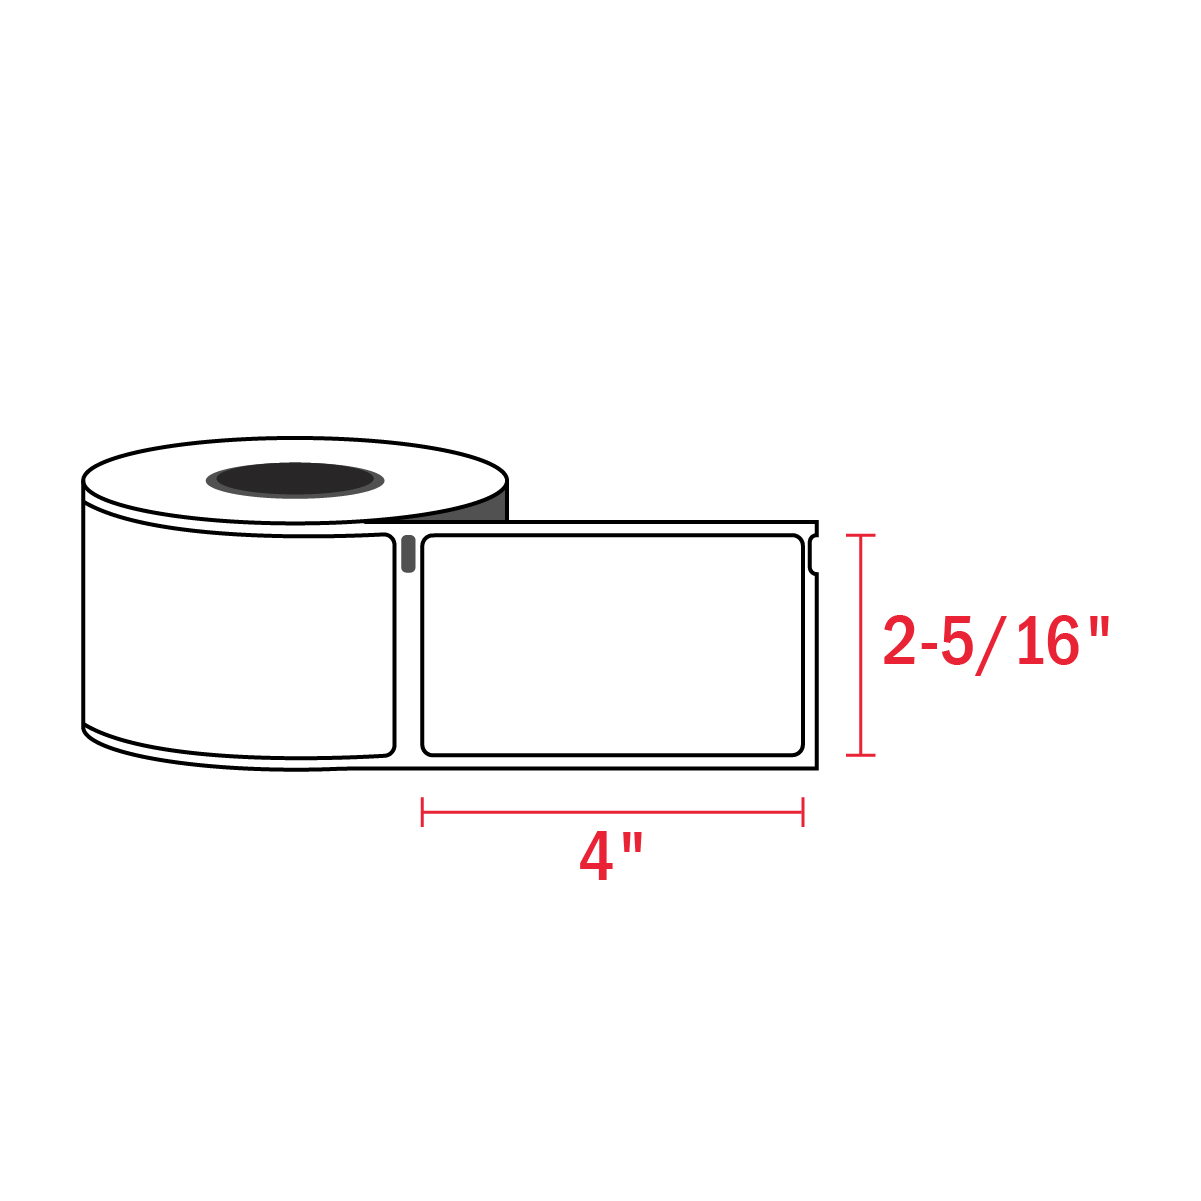 20 Rolls 2-5/16" x 4" Large Shipping Labels 30256 Fits